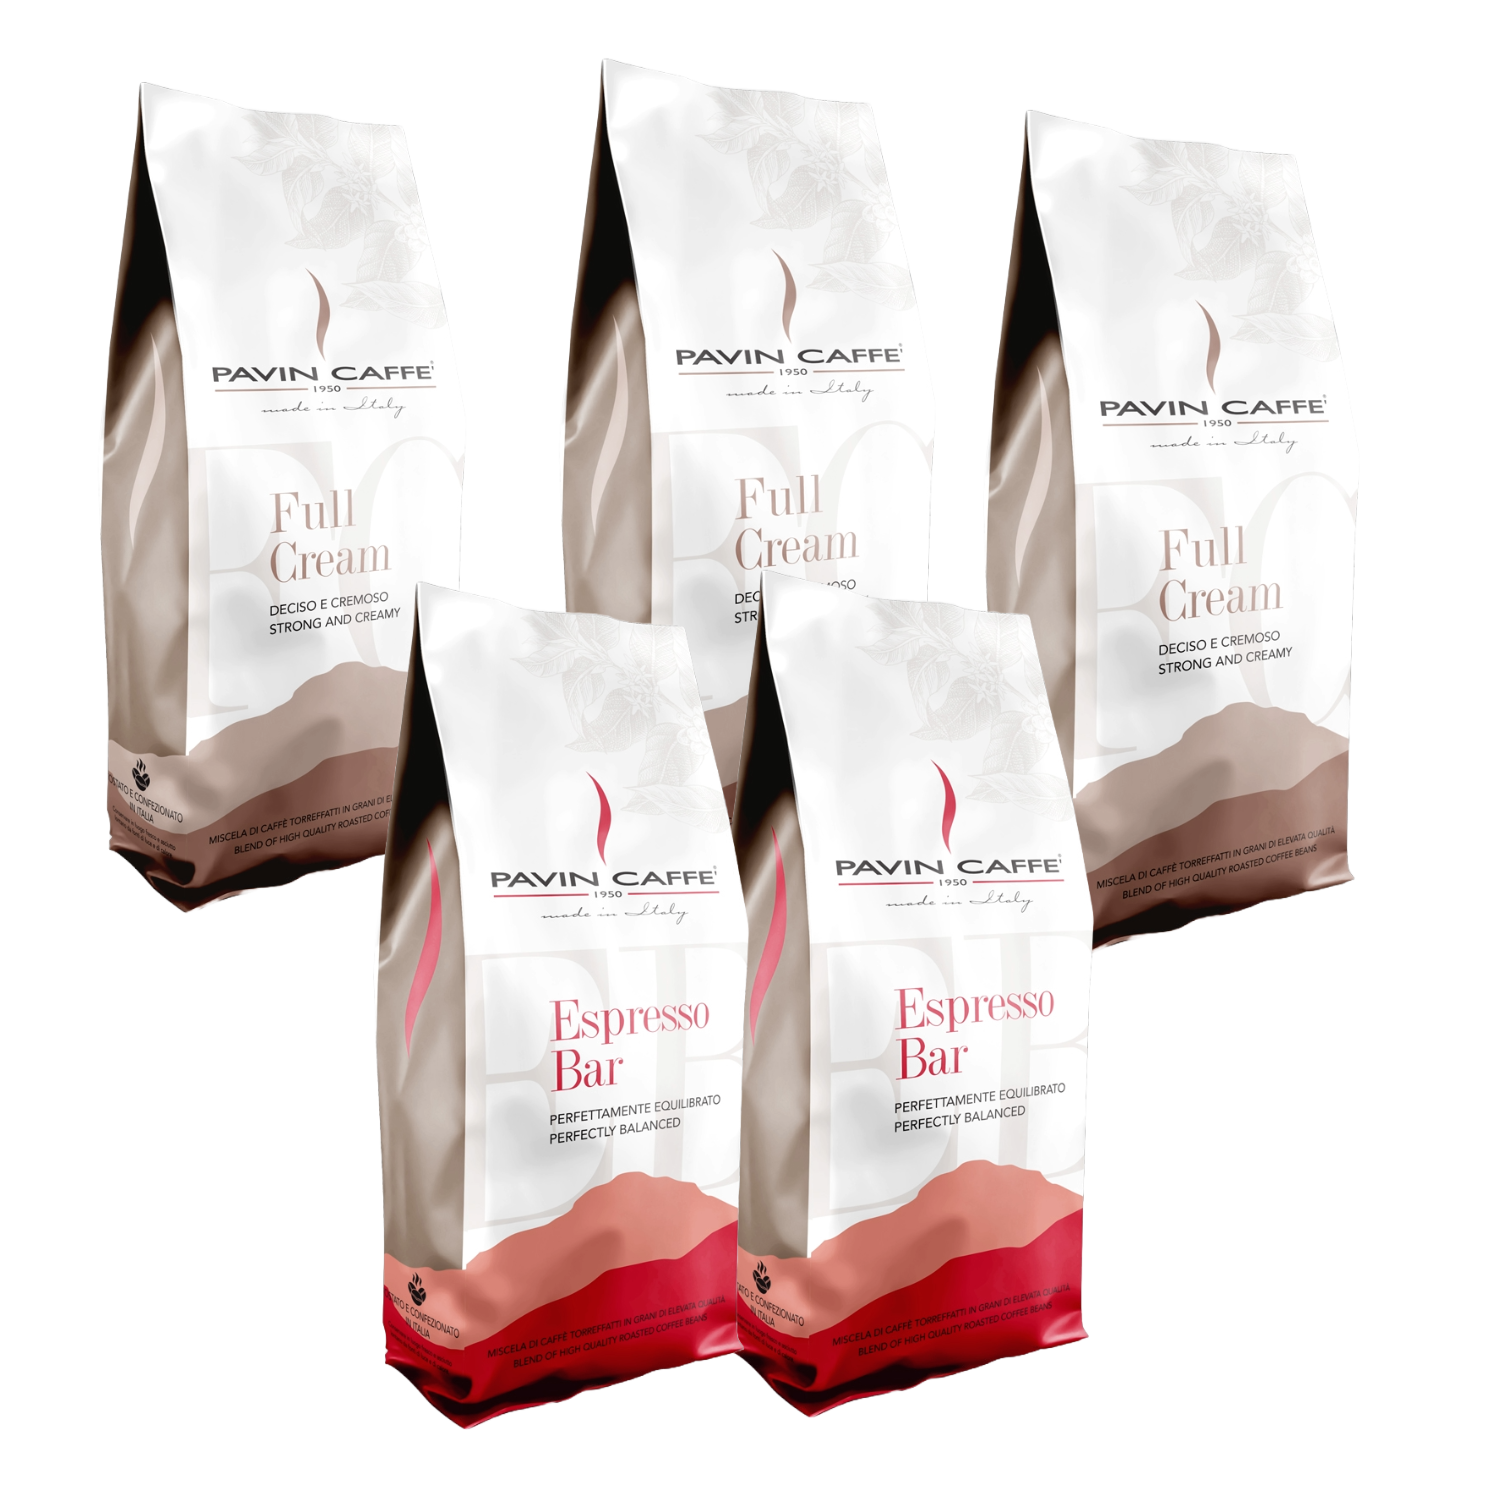 Pavin Caffe Espresso Beans Promotion - Variety Pack 5kg   2 Espresso Bar  and 3 Full Cream